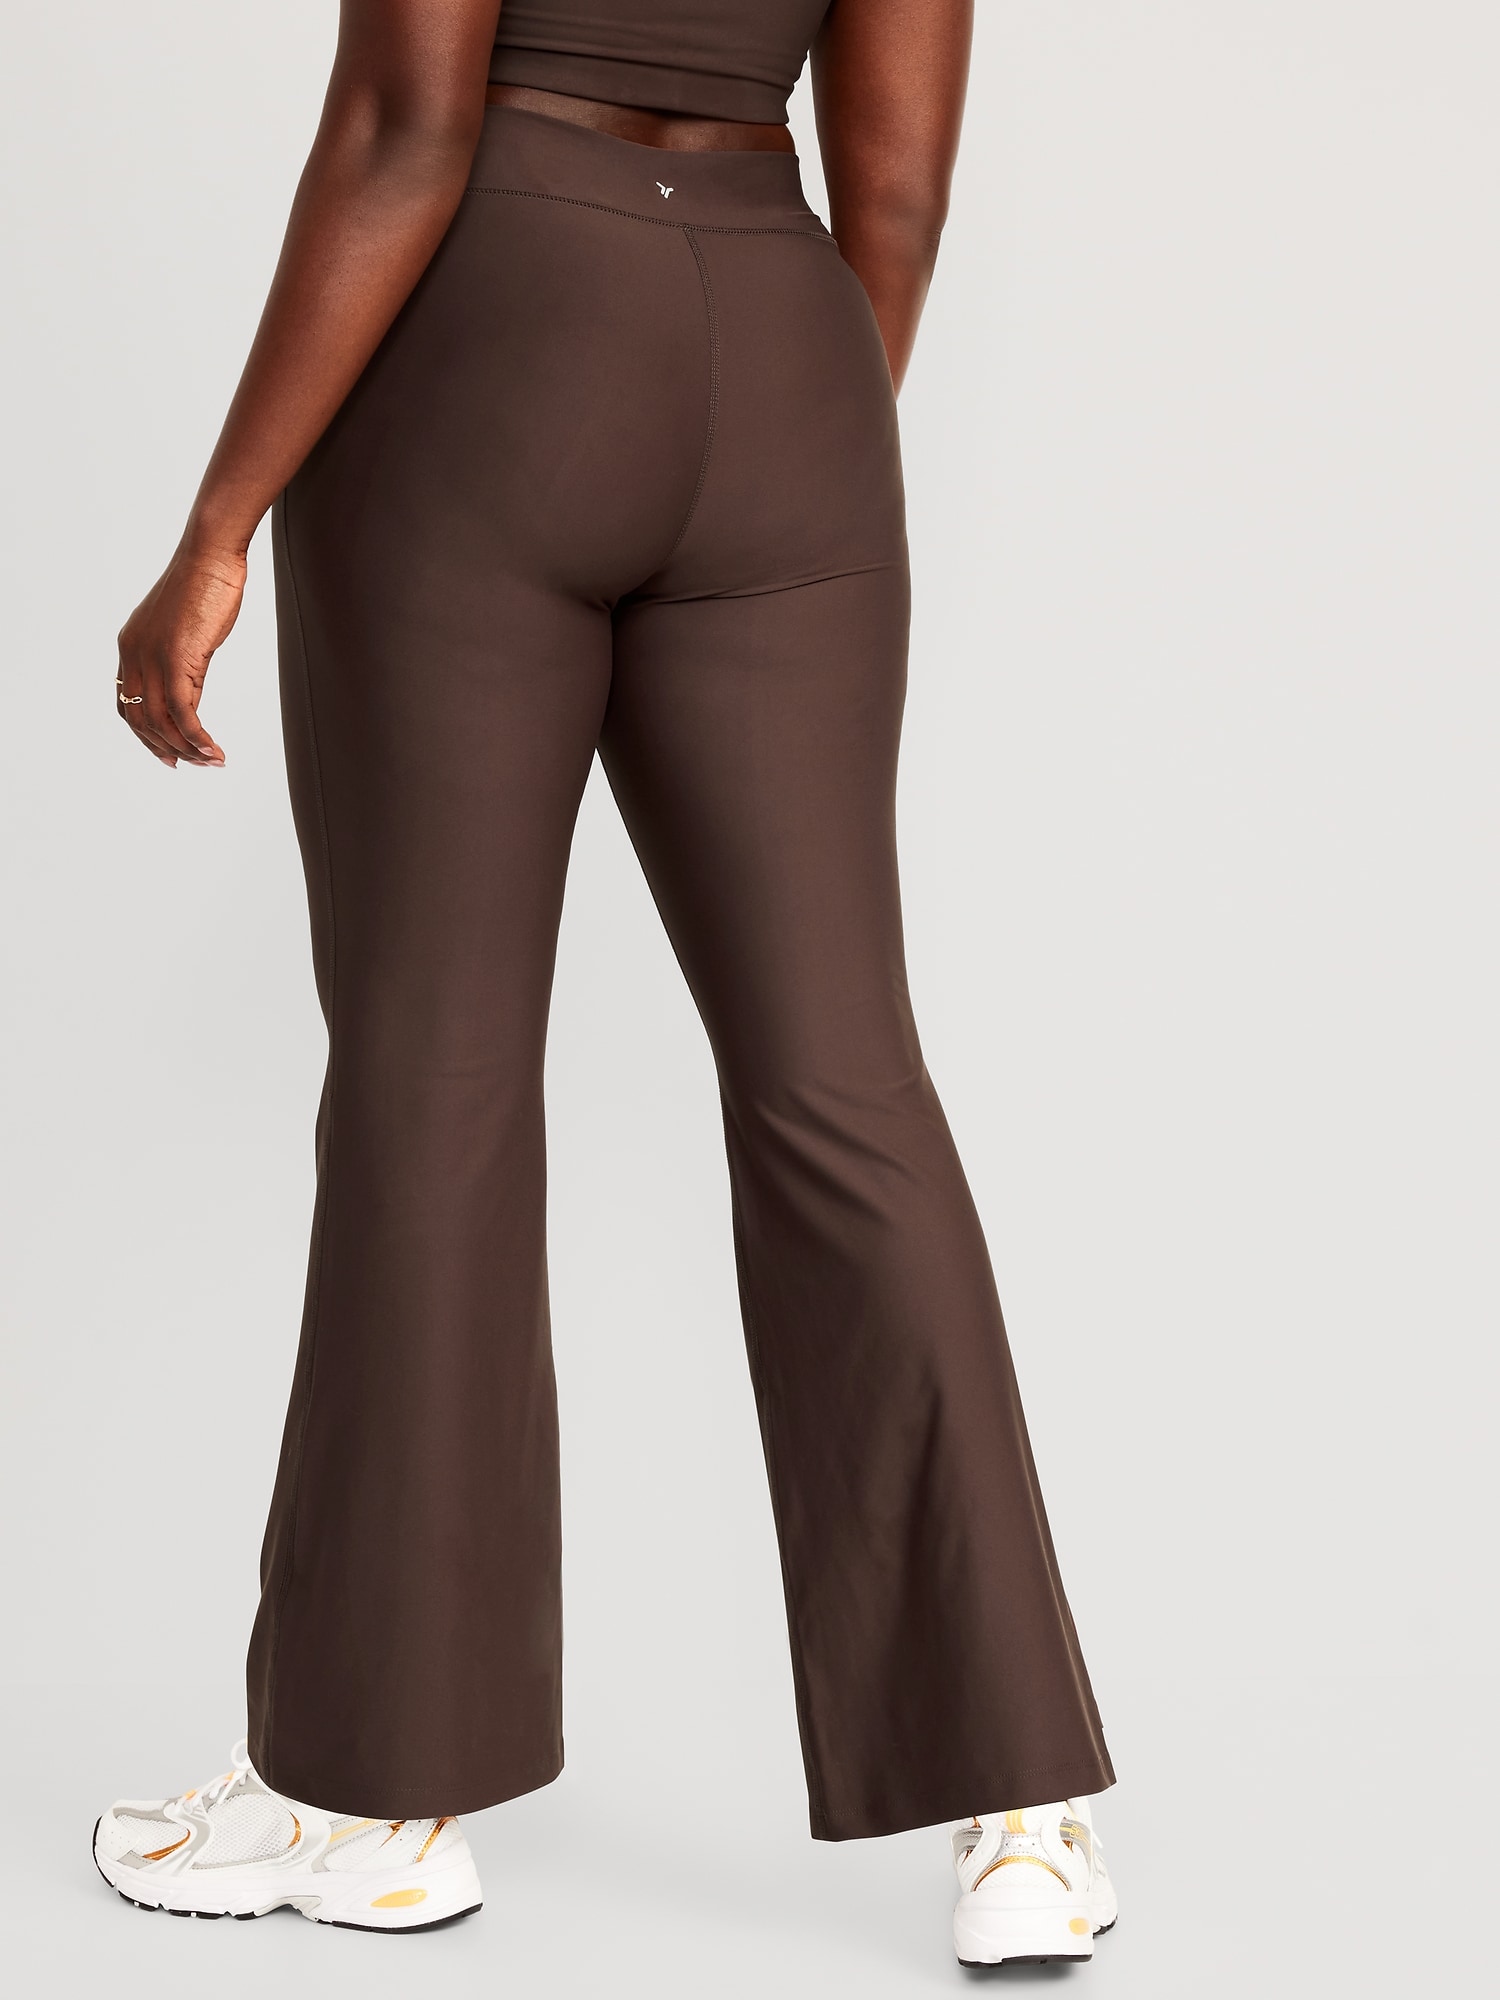 Long Flare Leggings for Women Tall Brown Ladies Solid Color High